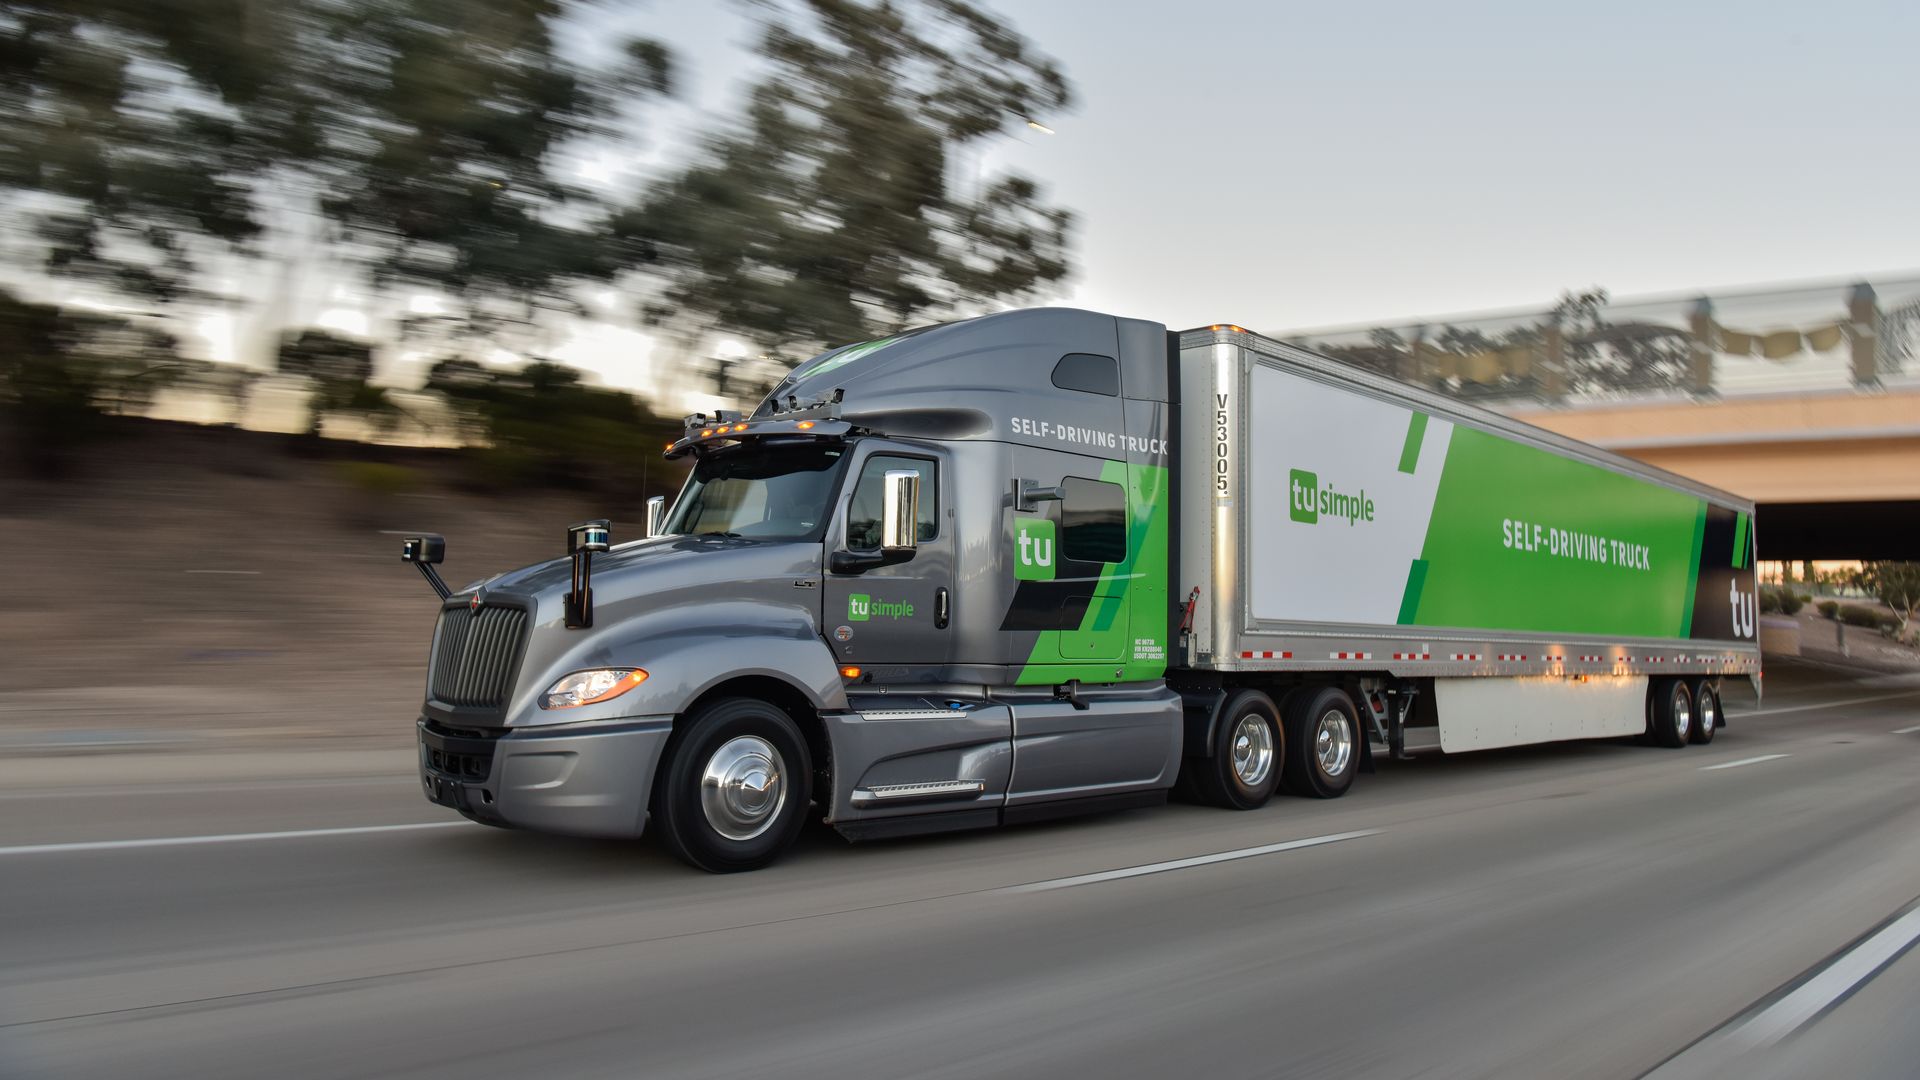 Image of TuSimple semi-truck driving fast under a highway overpass